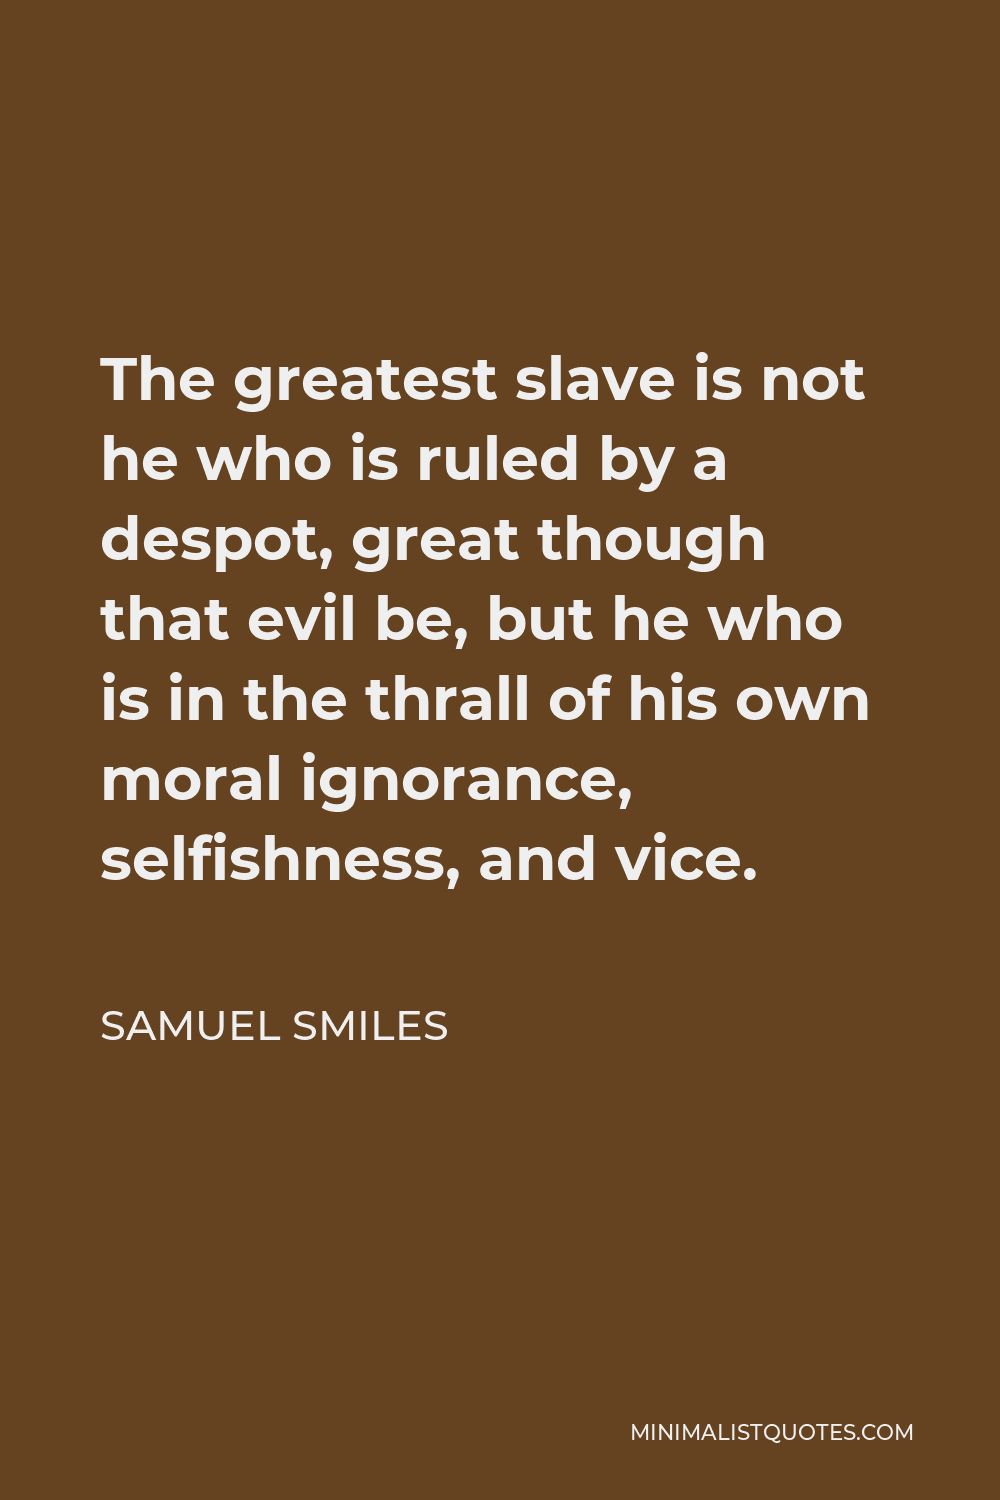 Samuel Smiles Quote - The greatest slave is not he who is ruled by a despot, great though that evil be, but he who is in the thrall of his own moral ignorance, selfishness, and vice.